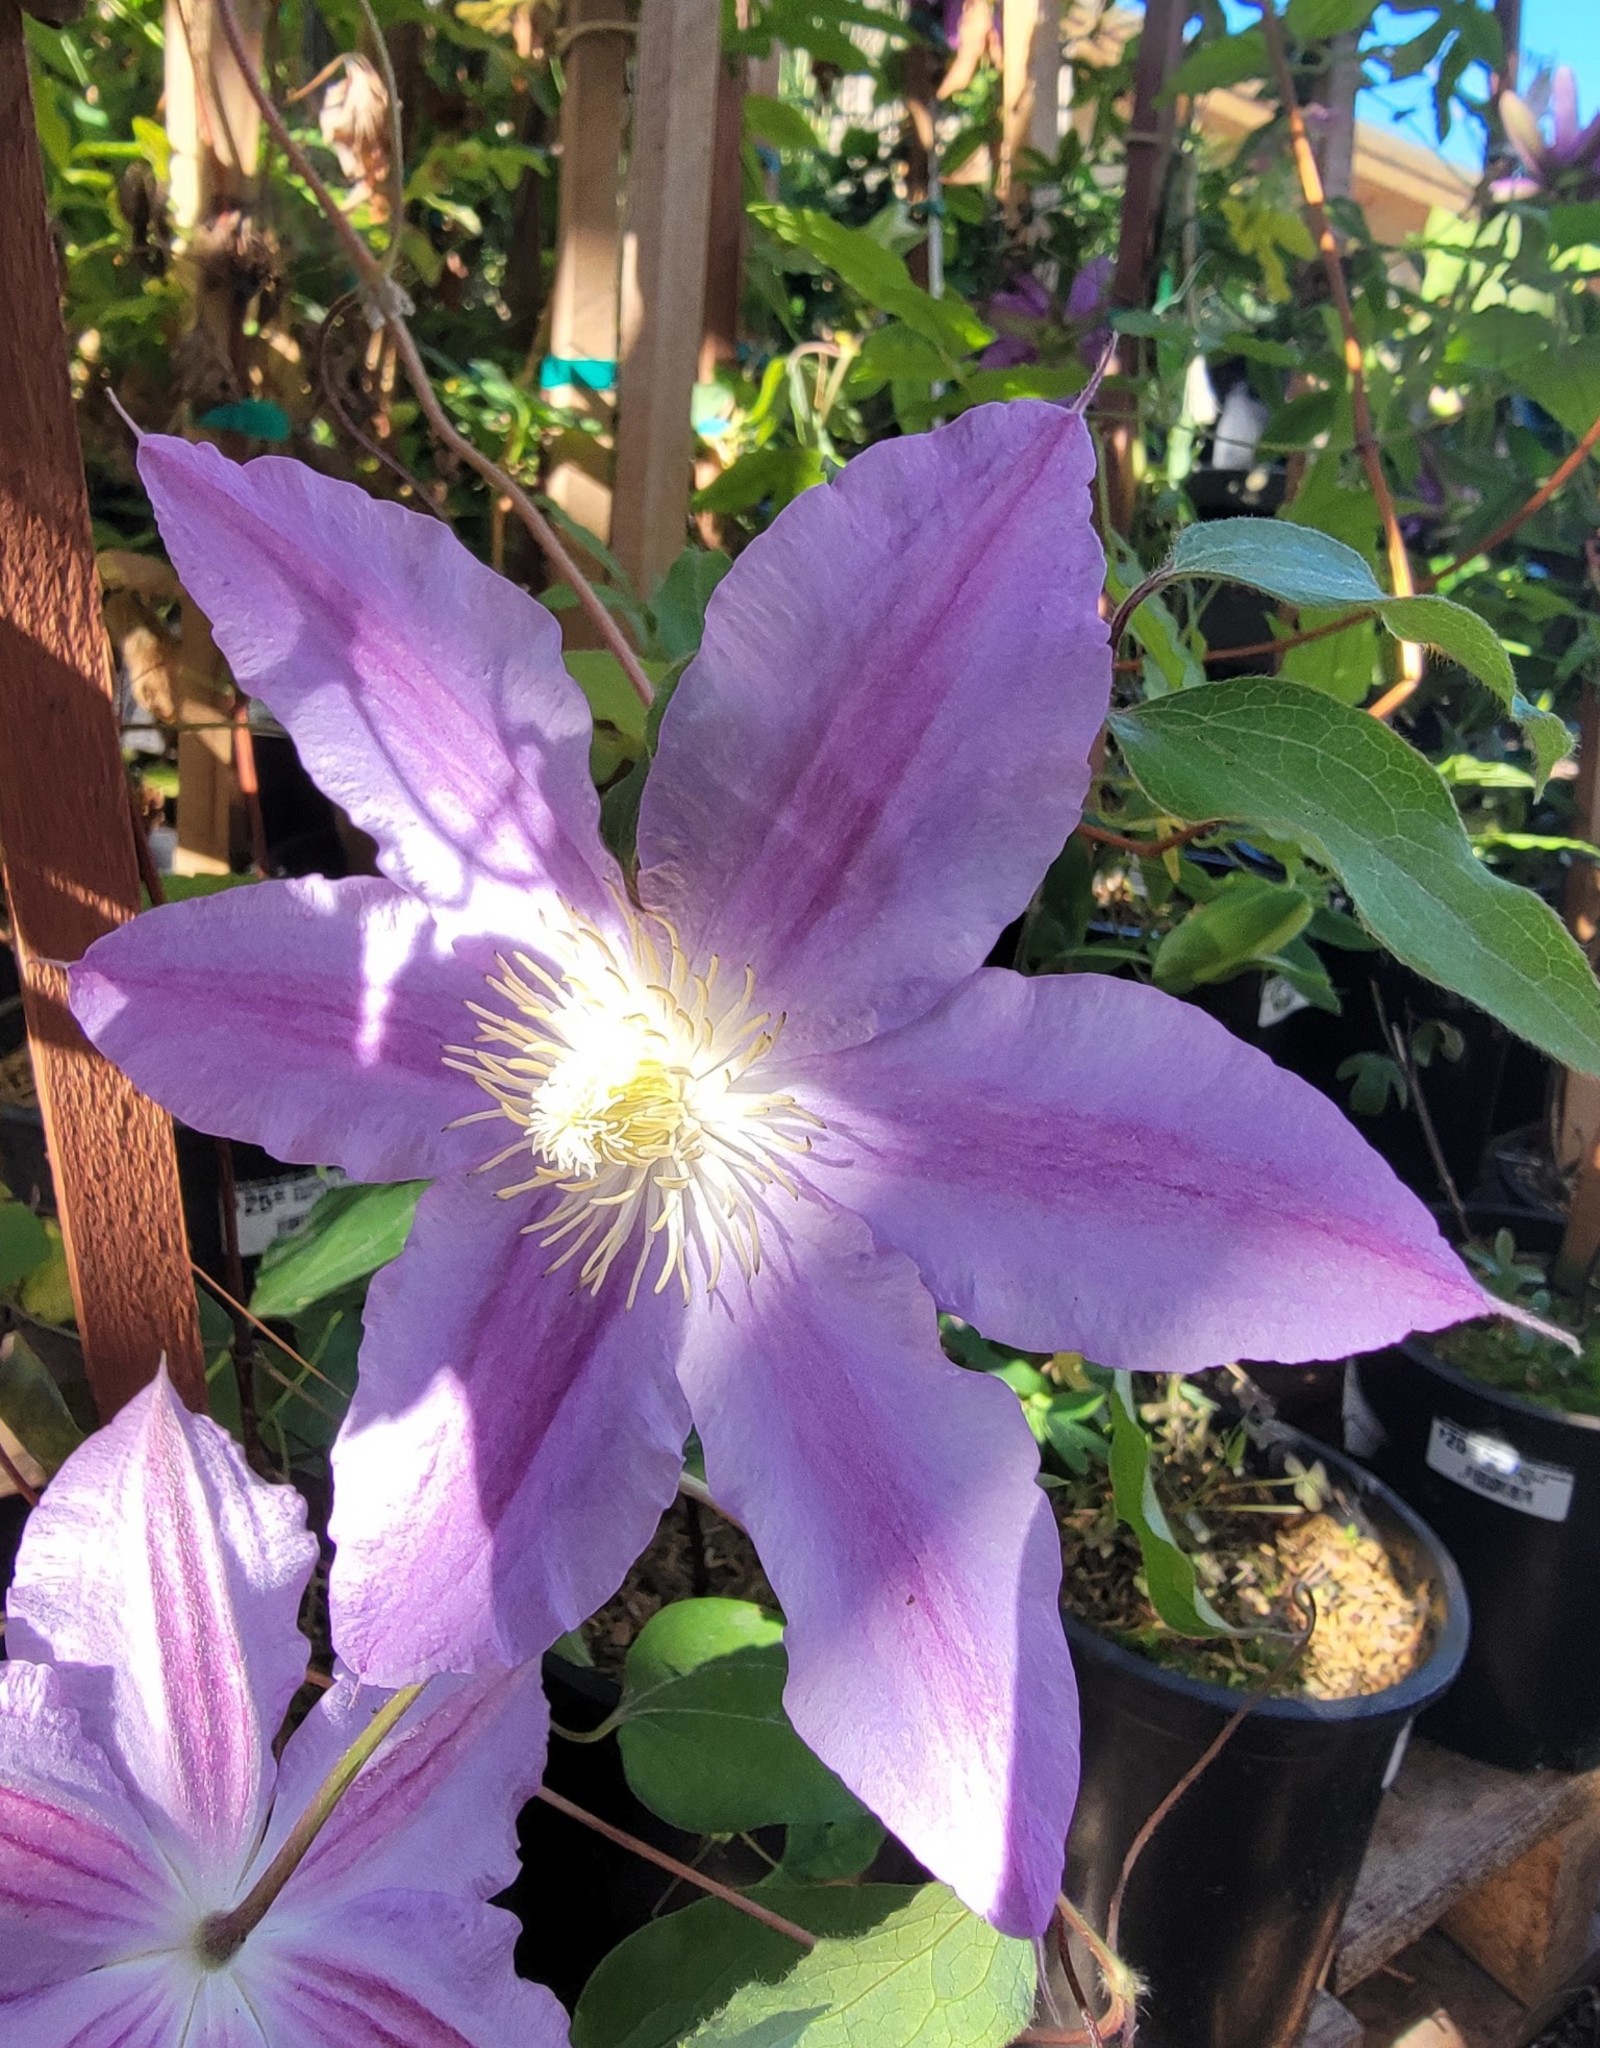 Clearview Clematis - Vancouver Sea Breeze 1 gal